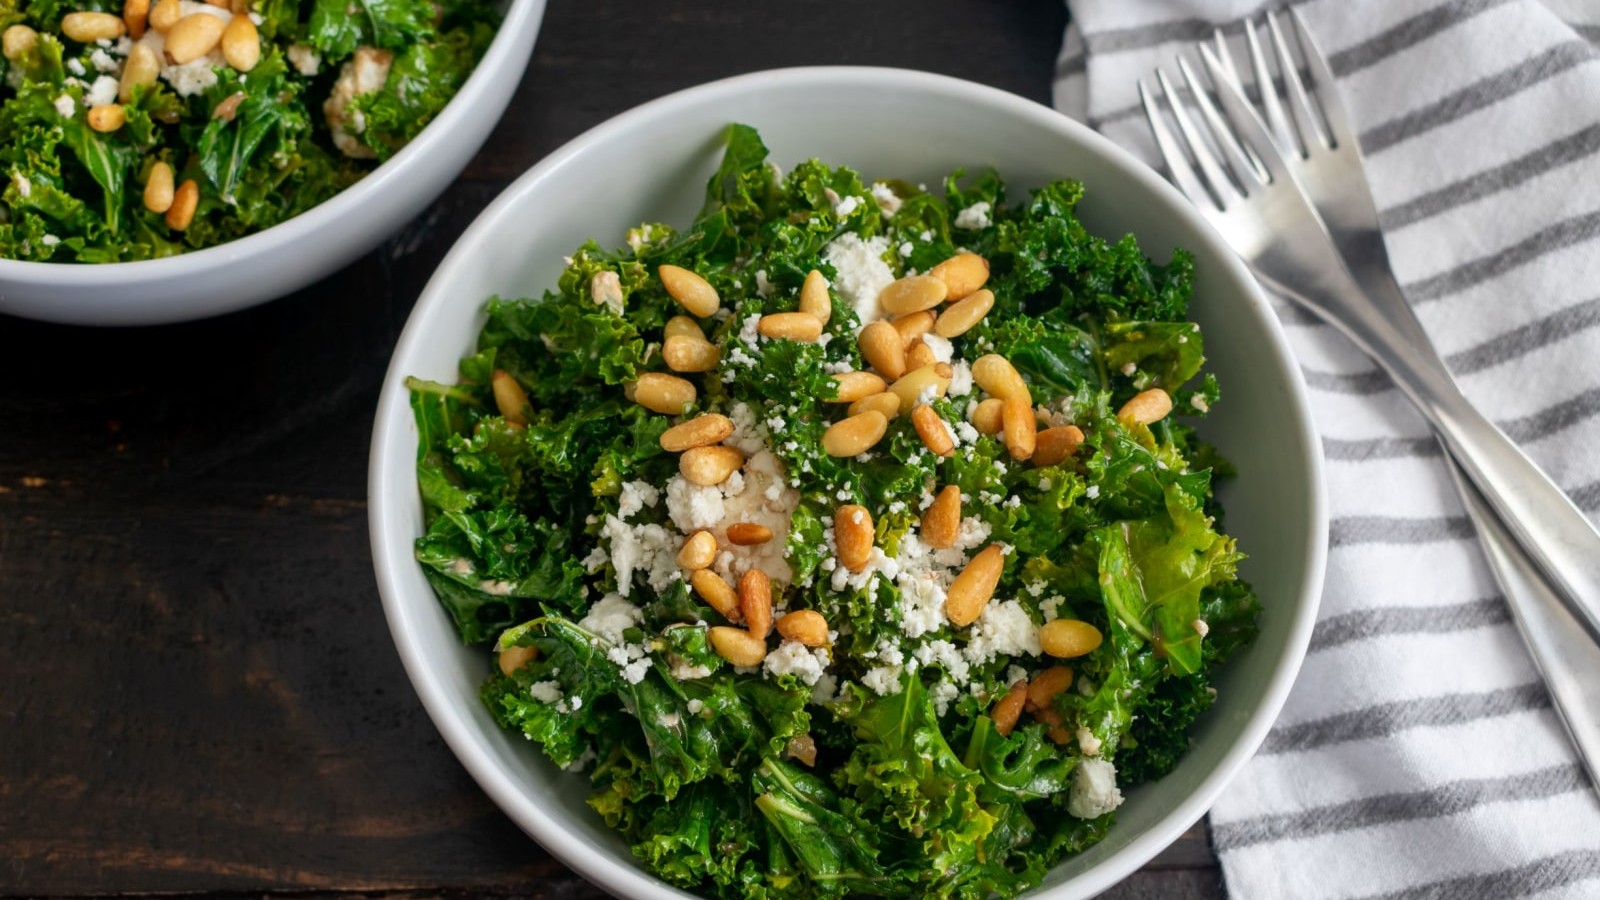 Image of Baby Kale Salad with Pine Nuts and Parmesan